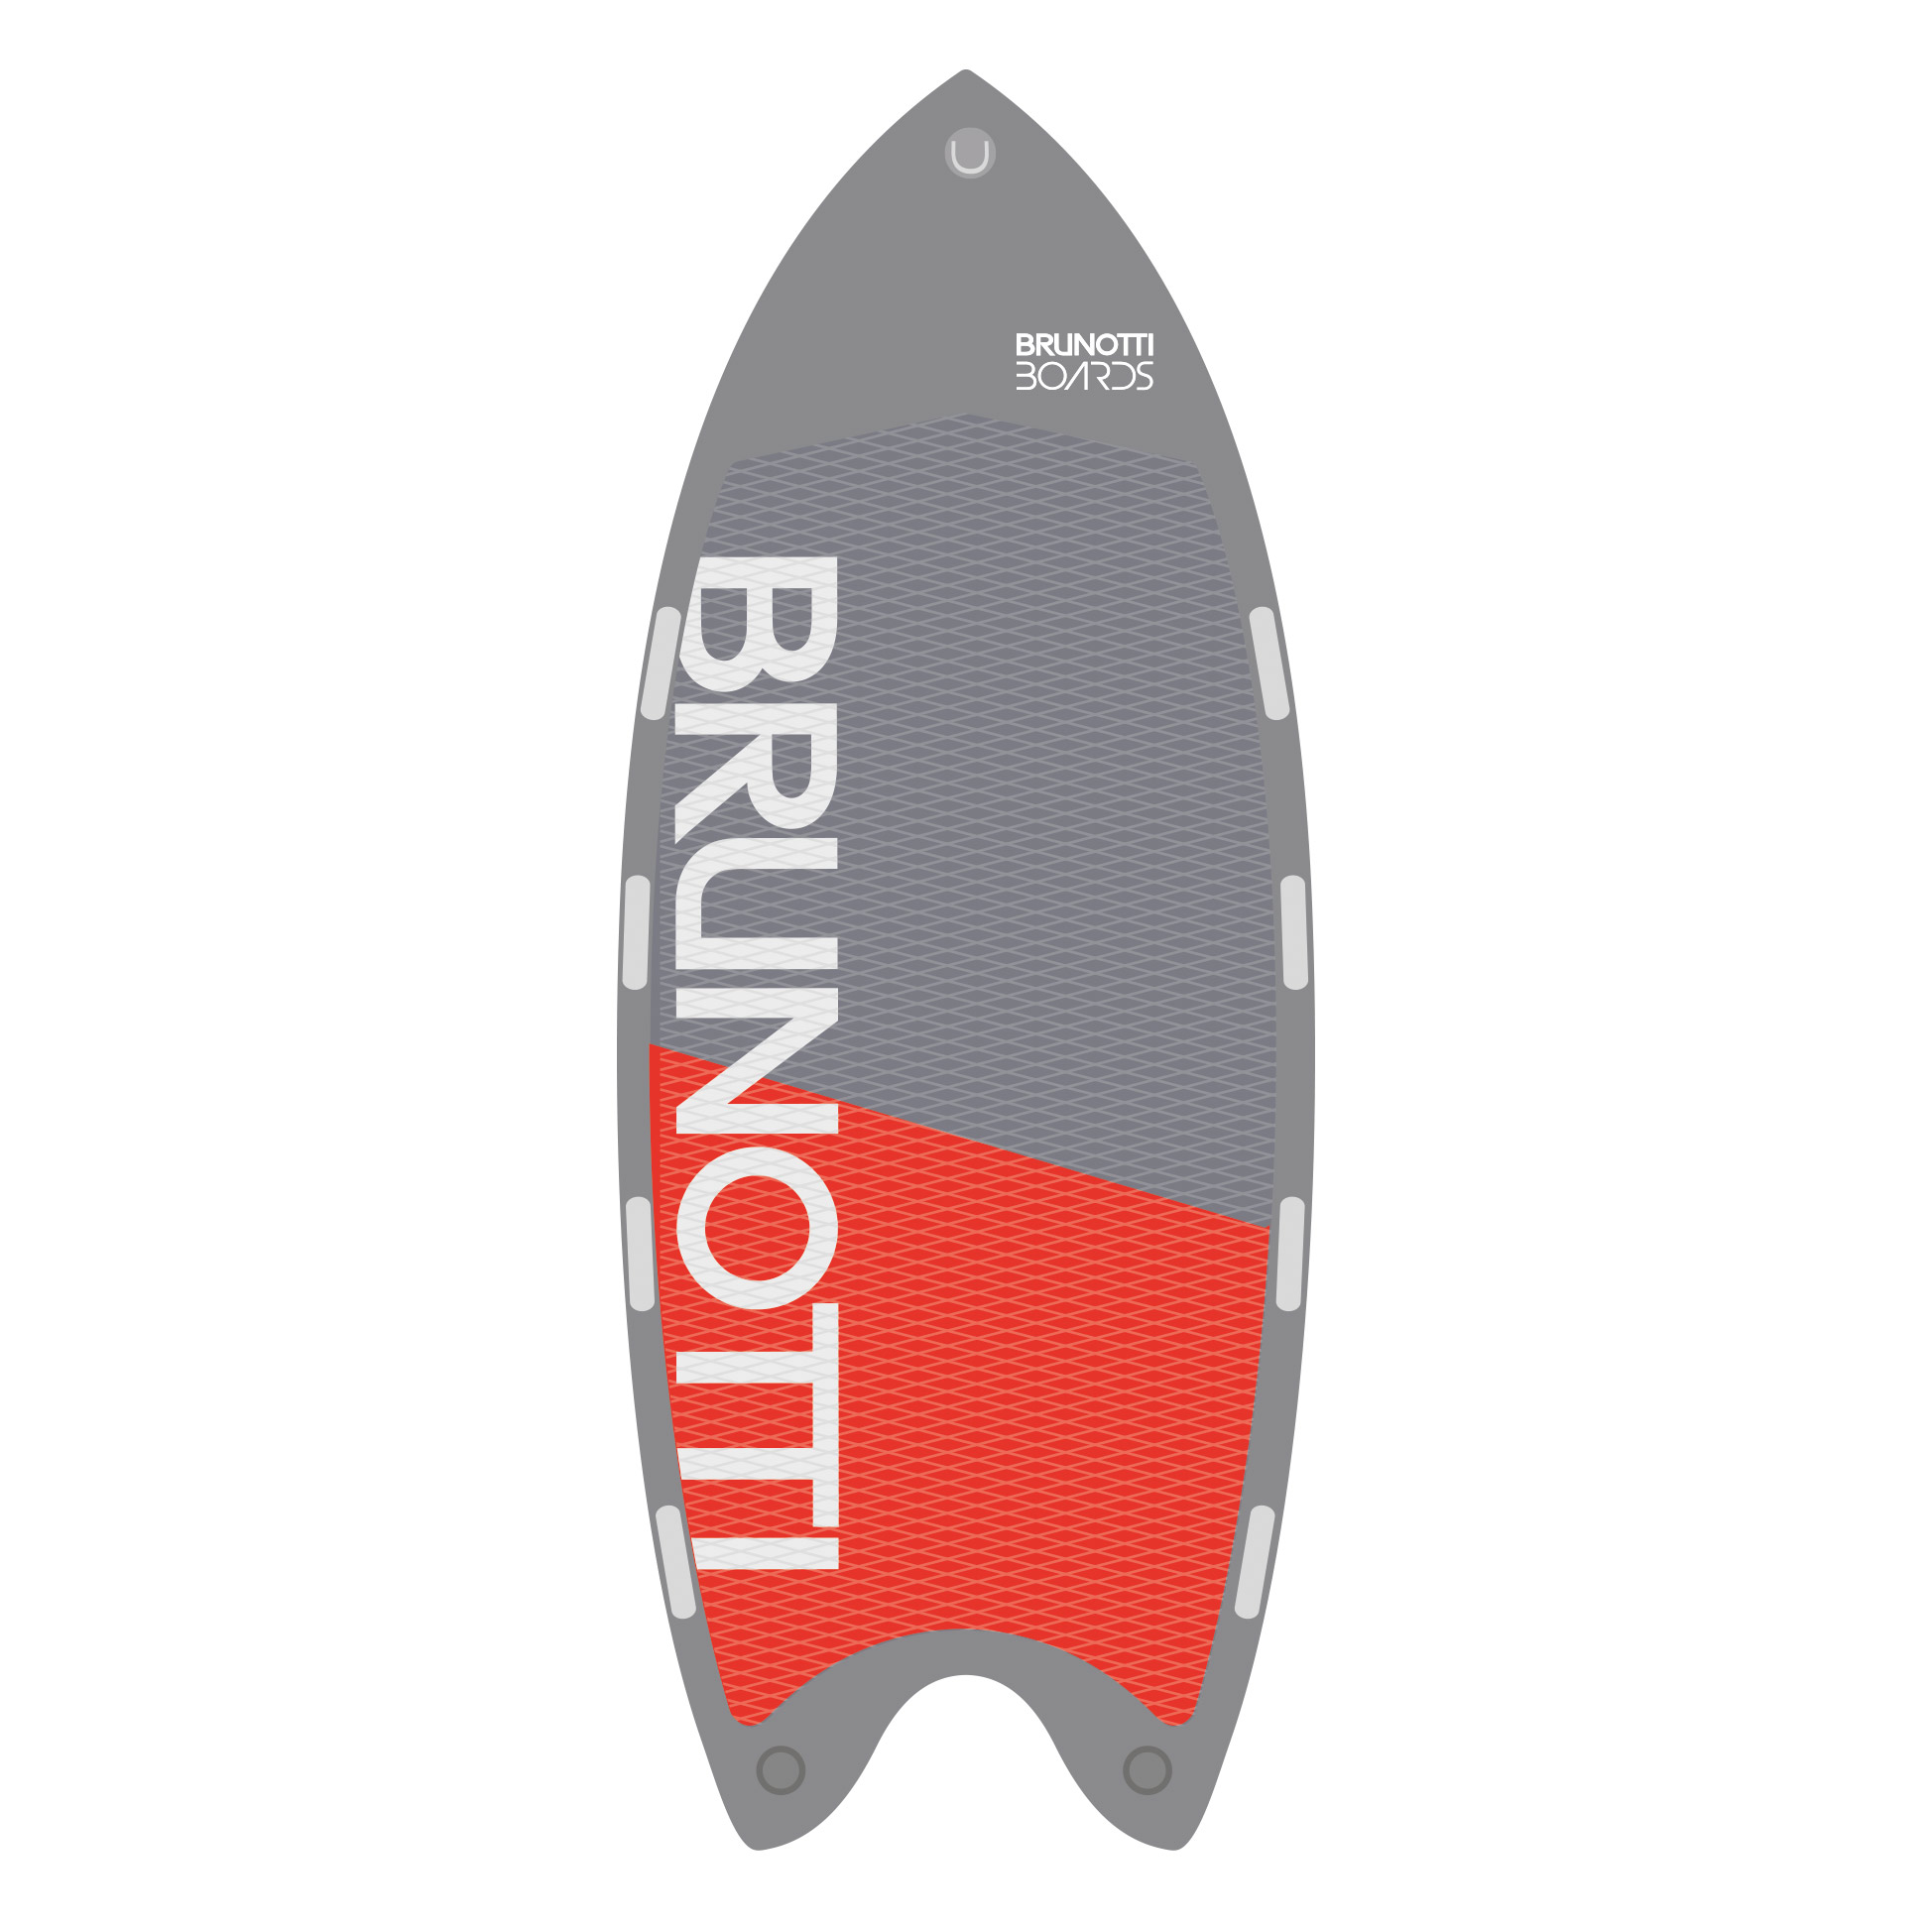   BOOMBASTIC MEGA INFLATABLE STAND-UP PADDLE BOARD BRUNOTTI 2017